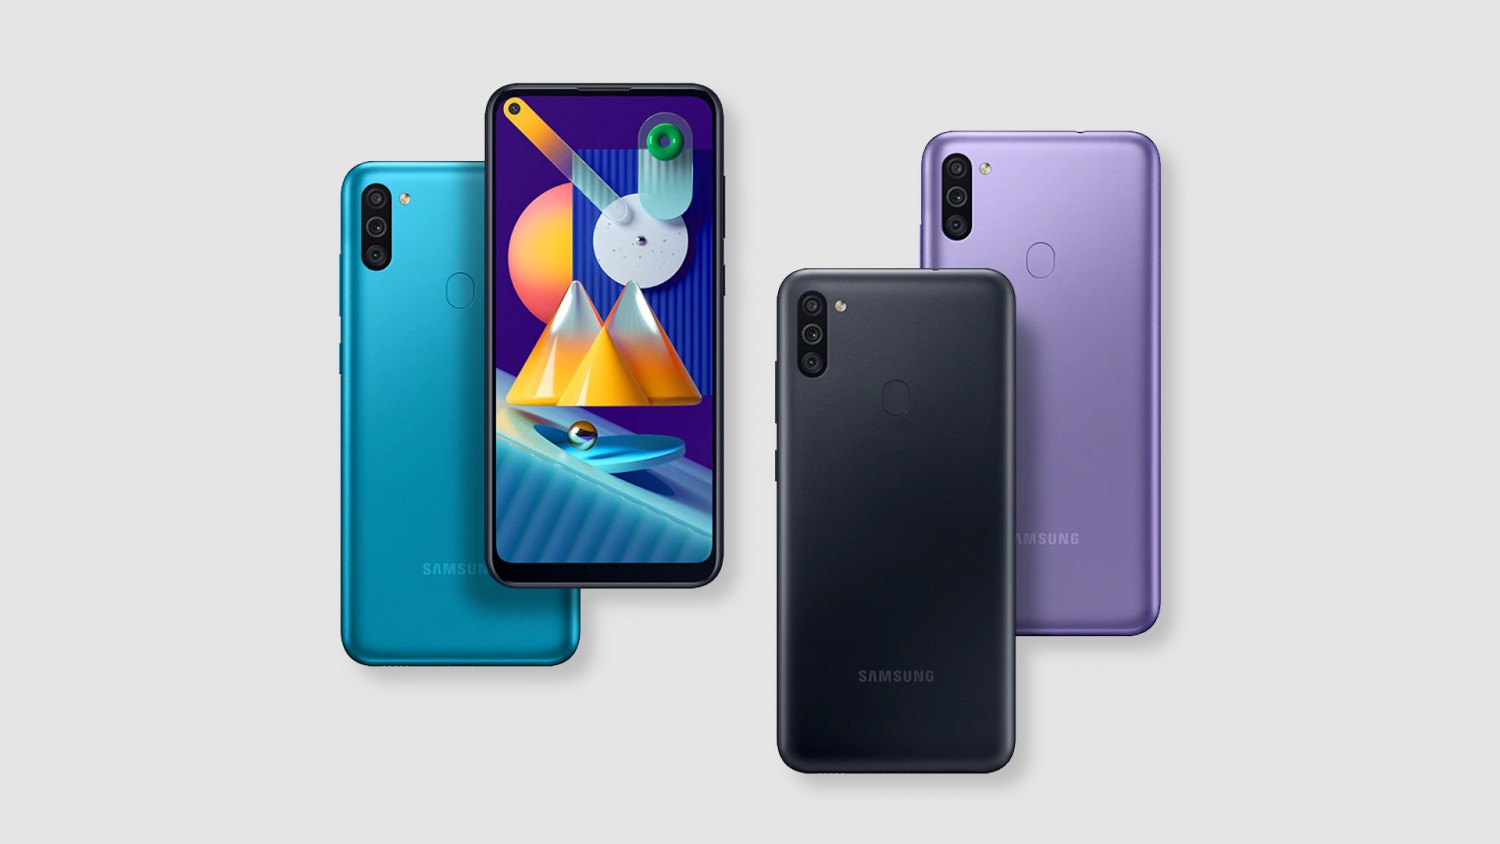 Overview of the Samsung Galaxy M11 smartphone with key features